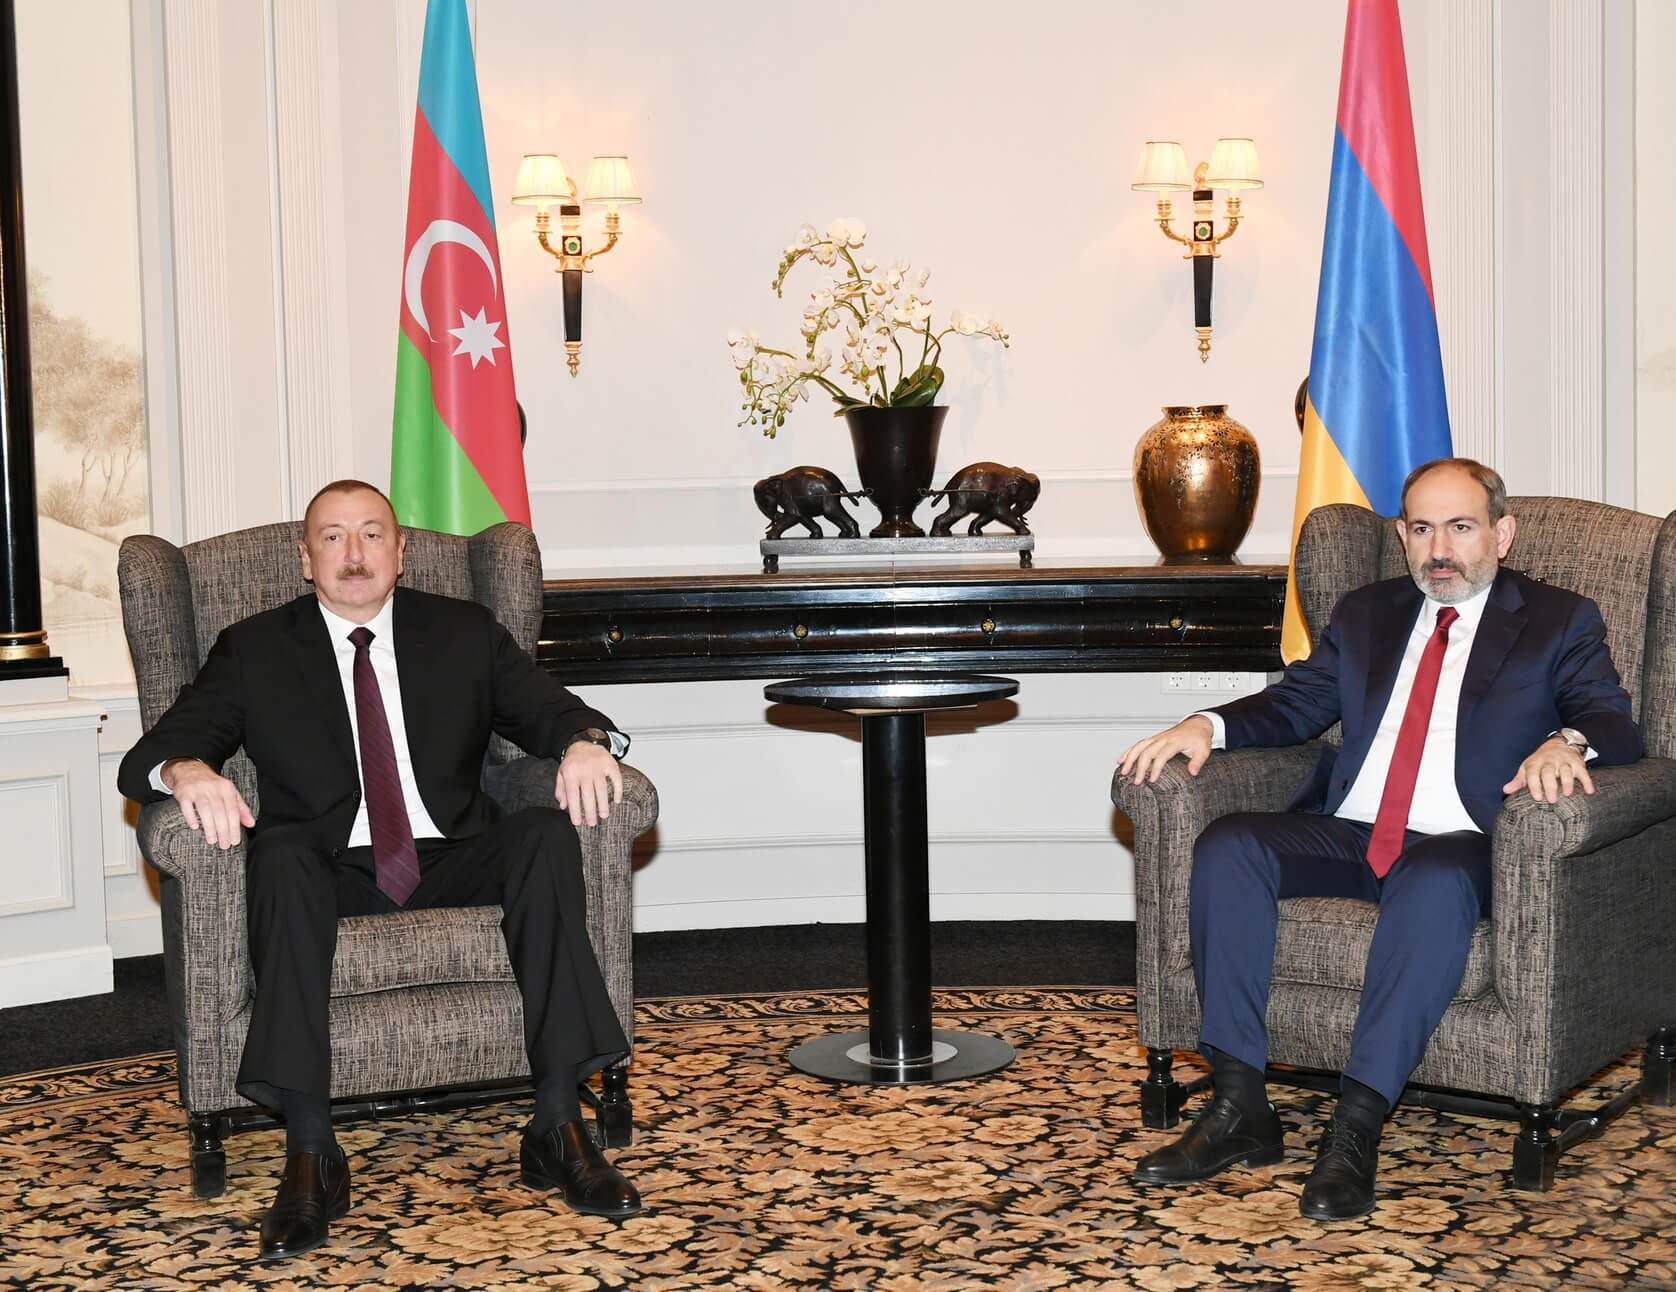 Azerbaijan Ready to Normalise Relations With Armenia Based on International Law